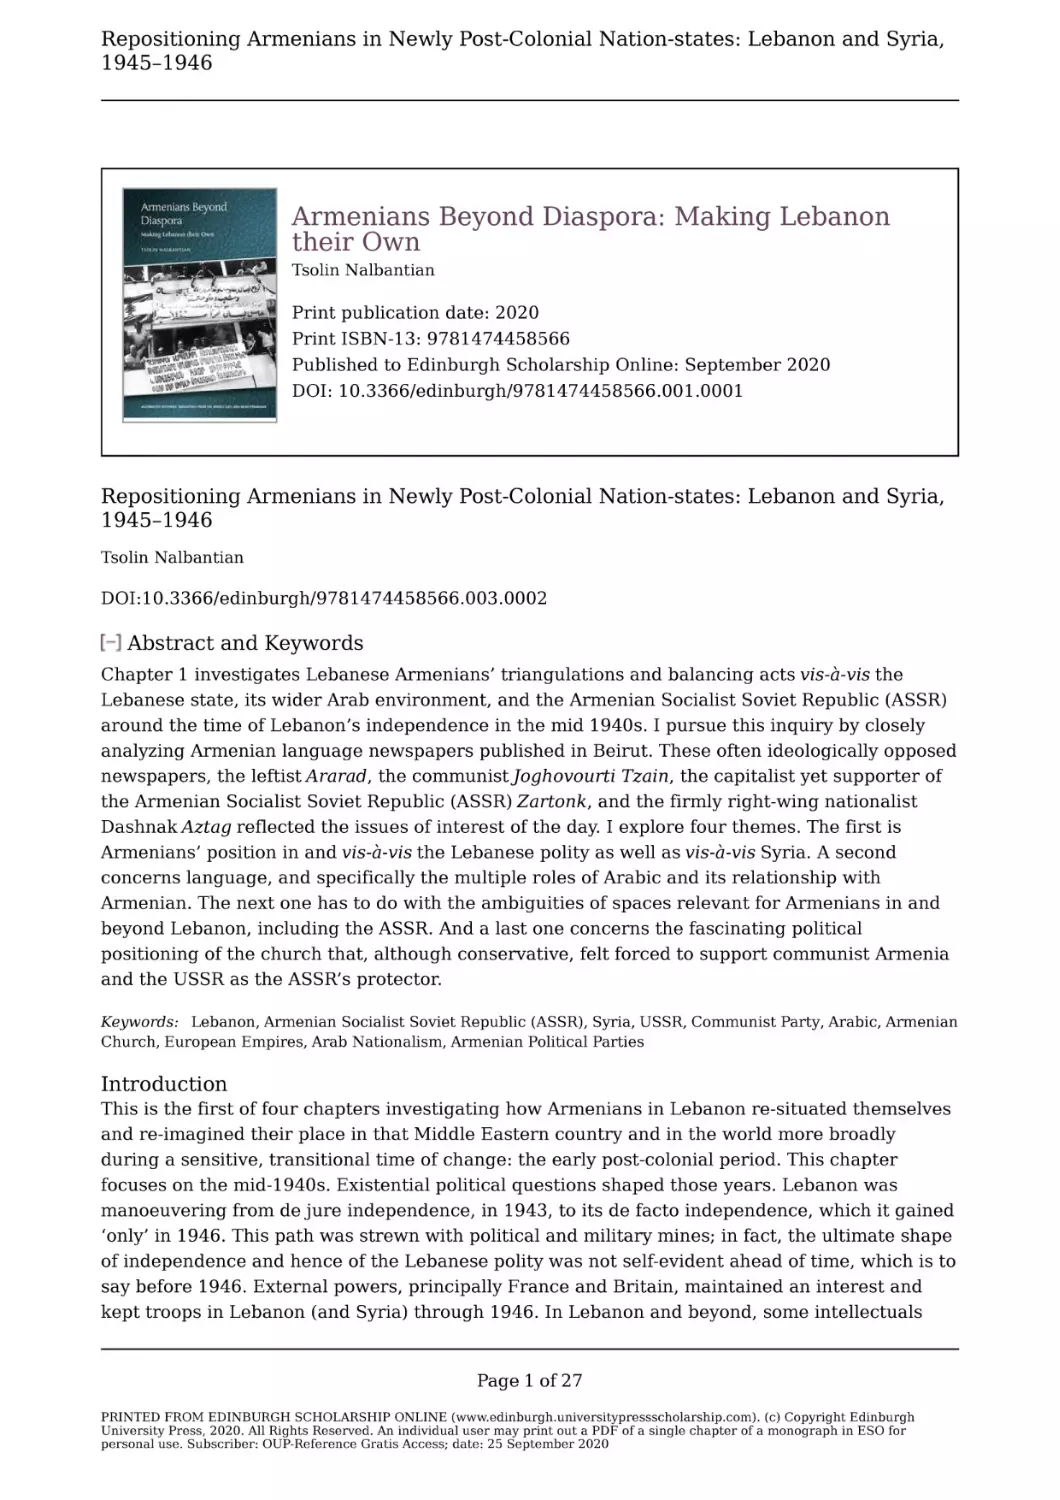 upso-9781474458566-chapter-002
Repositioning Armenians in Newly Post-Colonial Nation-states
Tsolin Nalbantian
Repositioning Armenians in Newly Post-Colonial Nation-states
Tsolin Nalbantian
Abstract and Keywords
Introduction